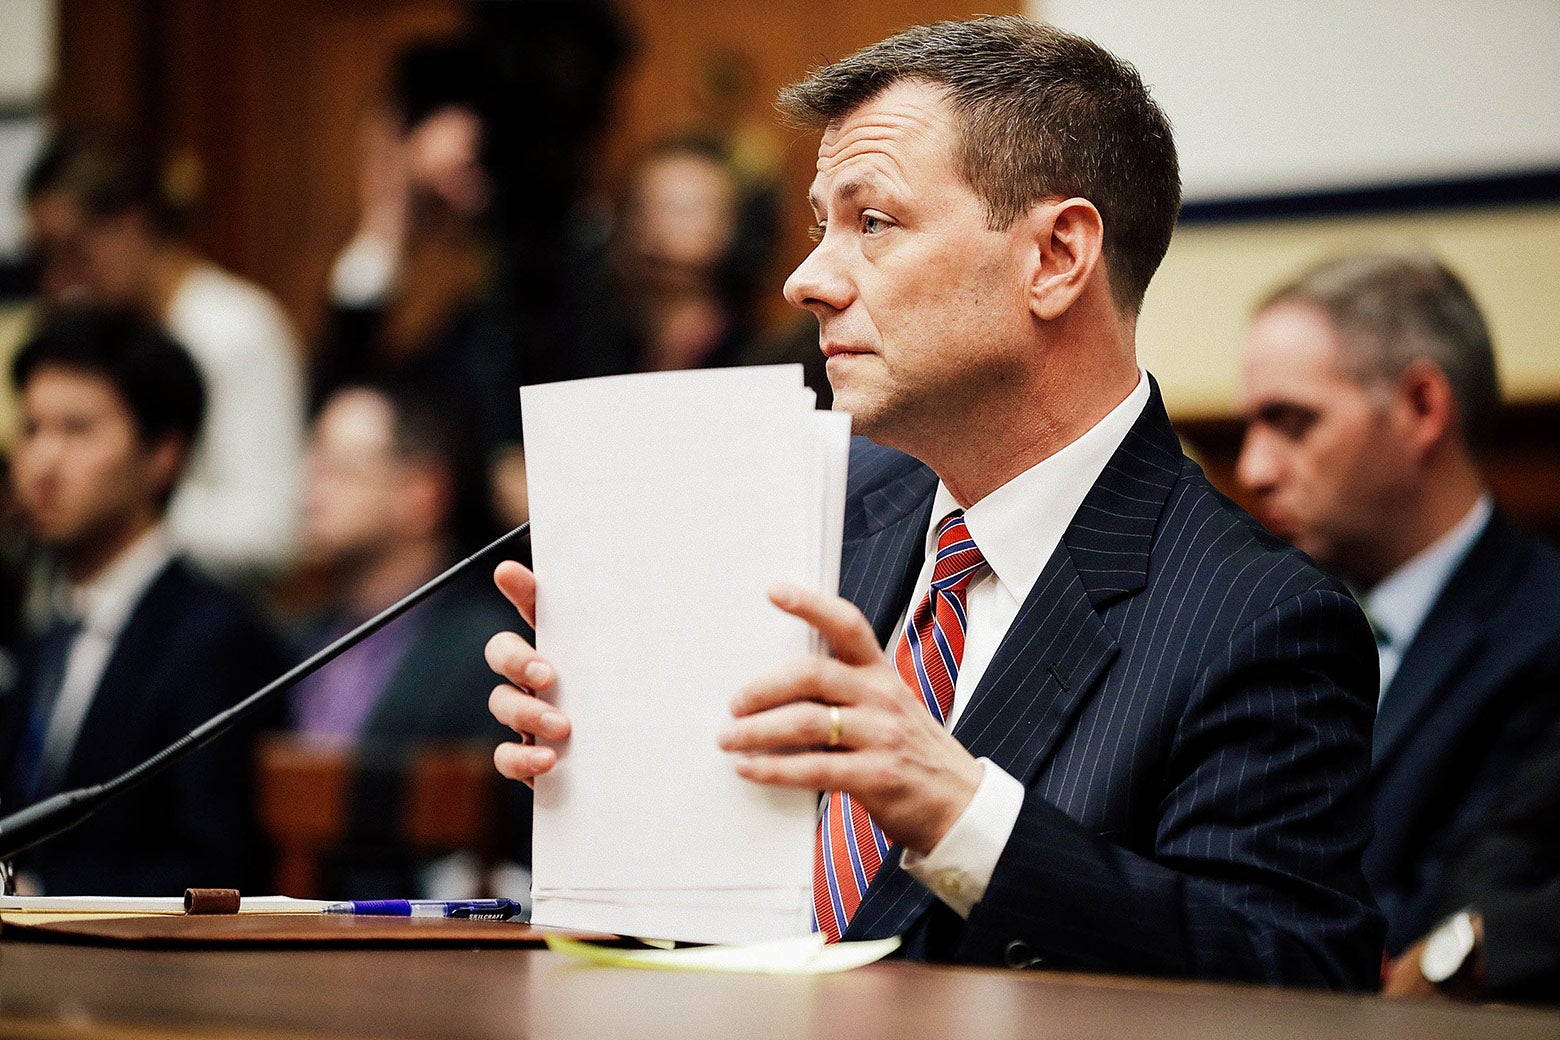 Peter Strzok testifies before a joint committee hearing on Capitol Hill on Thursday.